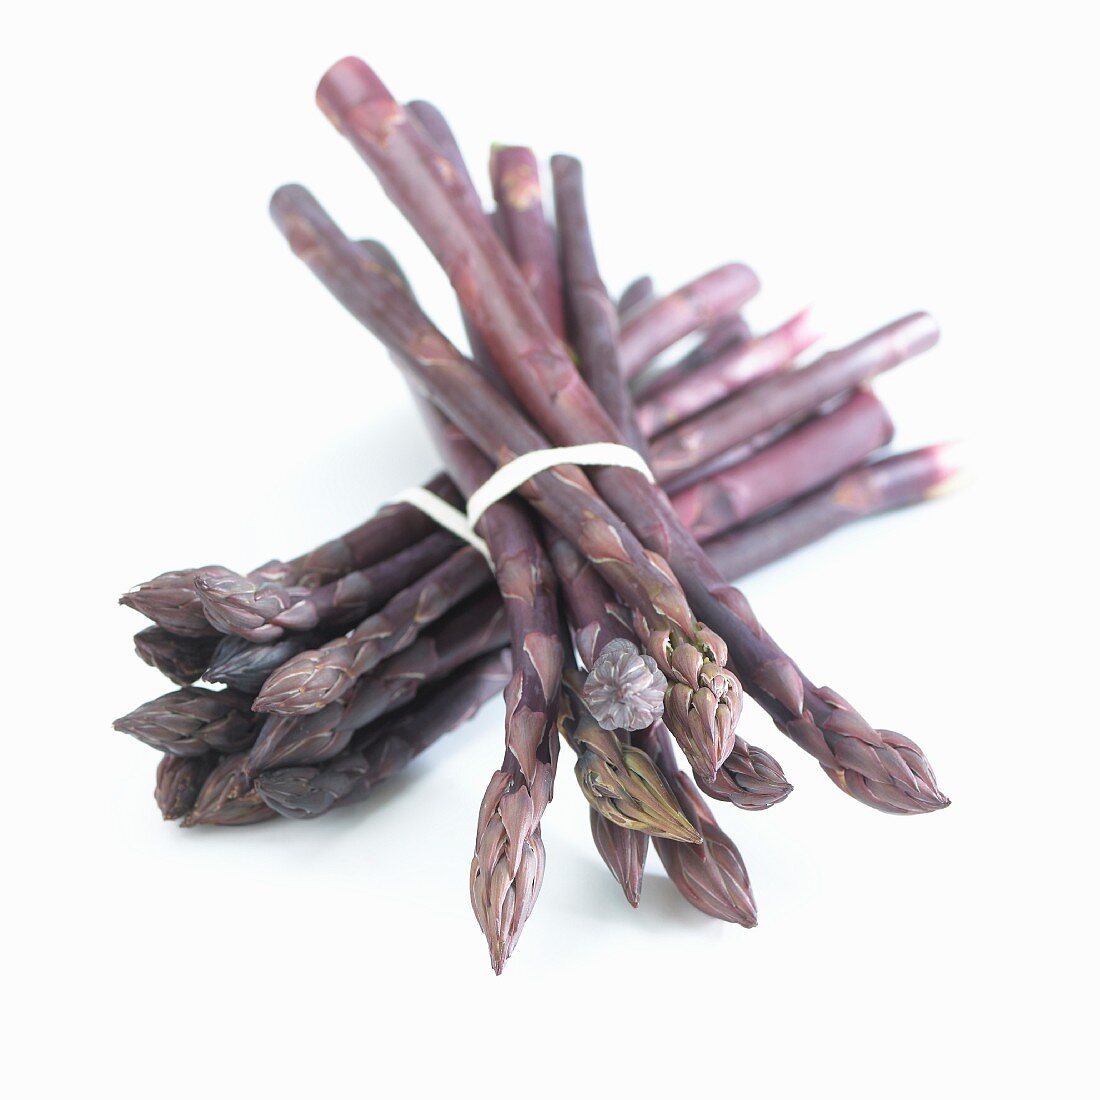 Two bunches of purple asparagus (Asparagus Pacific Purple)